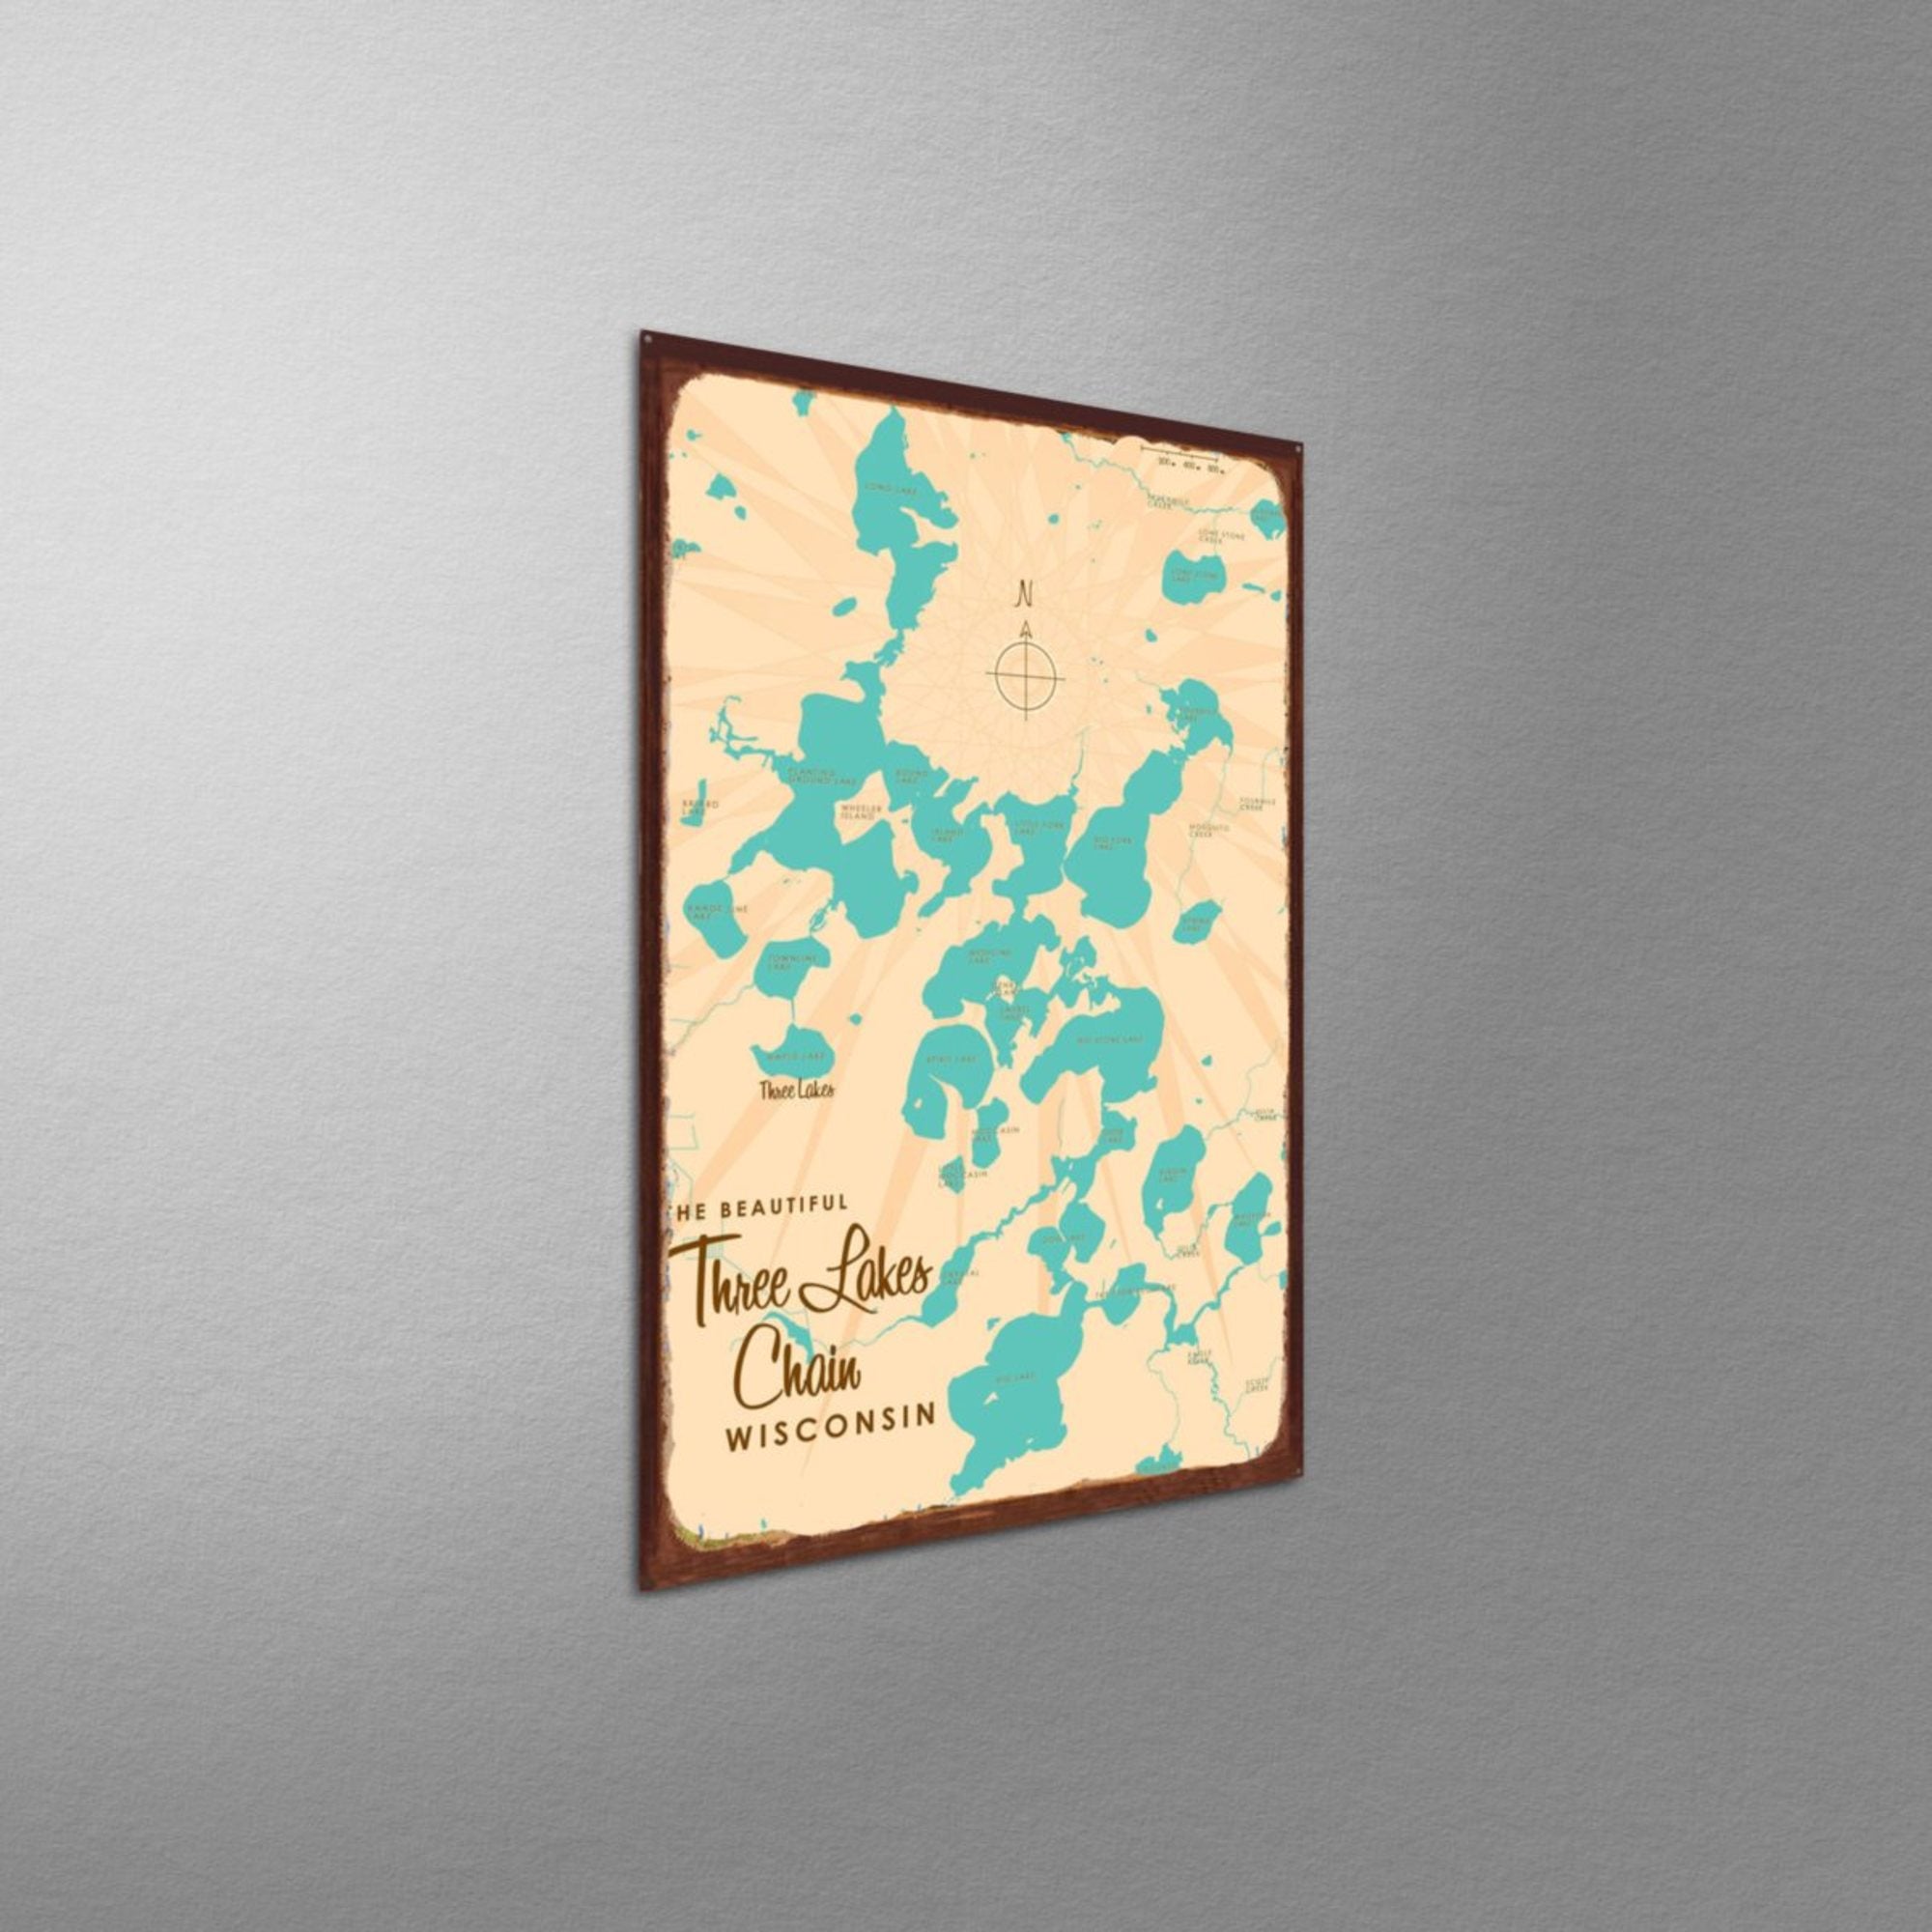 Three Lakes Chain Wisconsin, Rustic Metal Sign Map Art